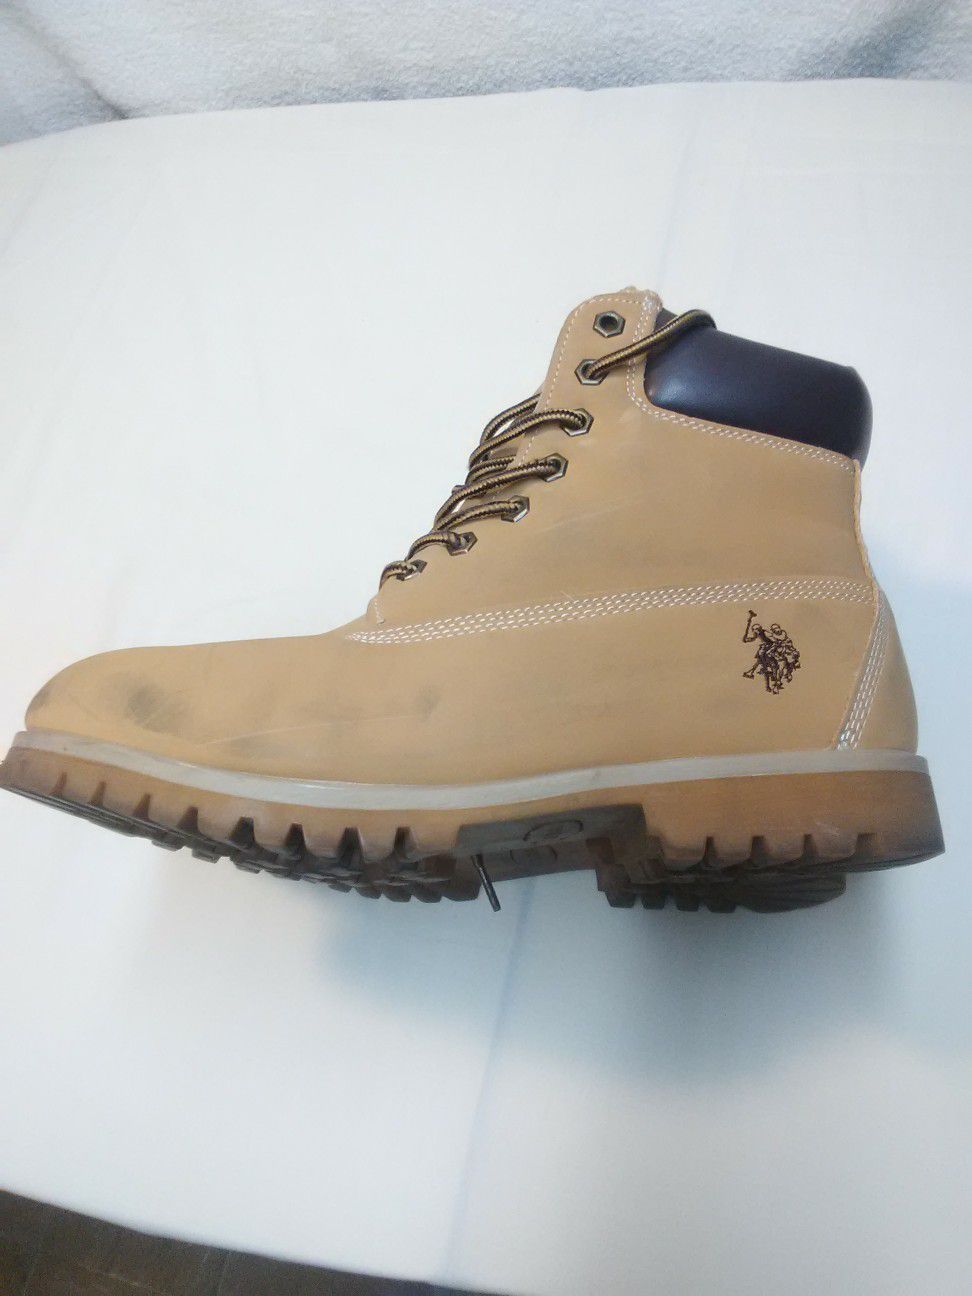 US POLO ASSN Hiking Boots - Size 11